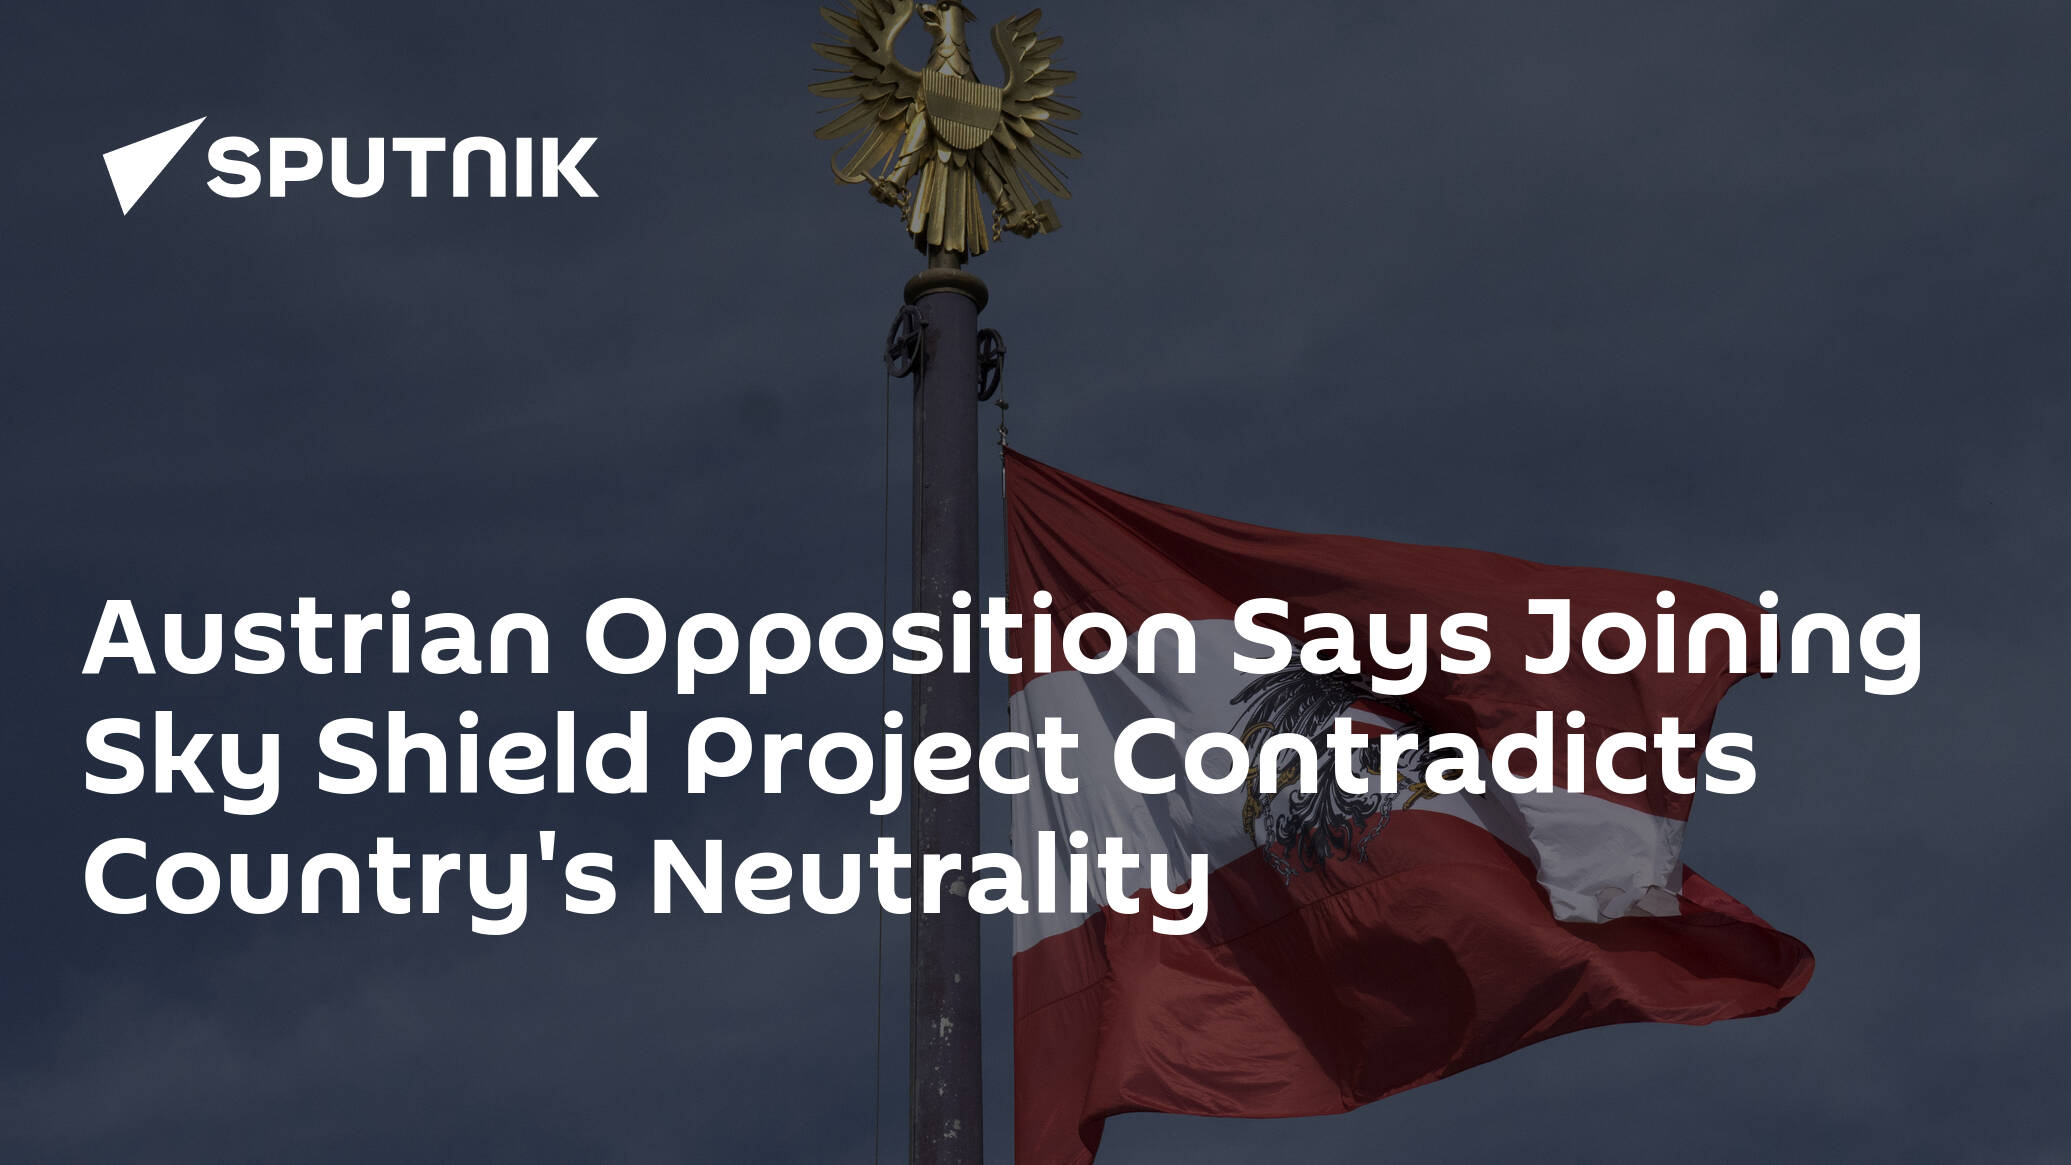 Austrian Opposition Says Joining Sky Shield Project Contradicts Country's Neutrality